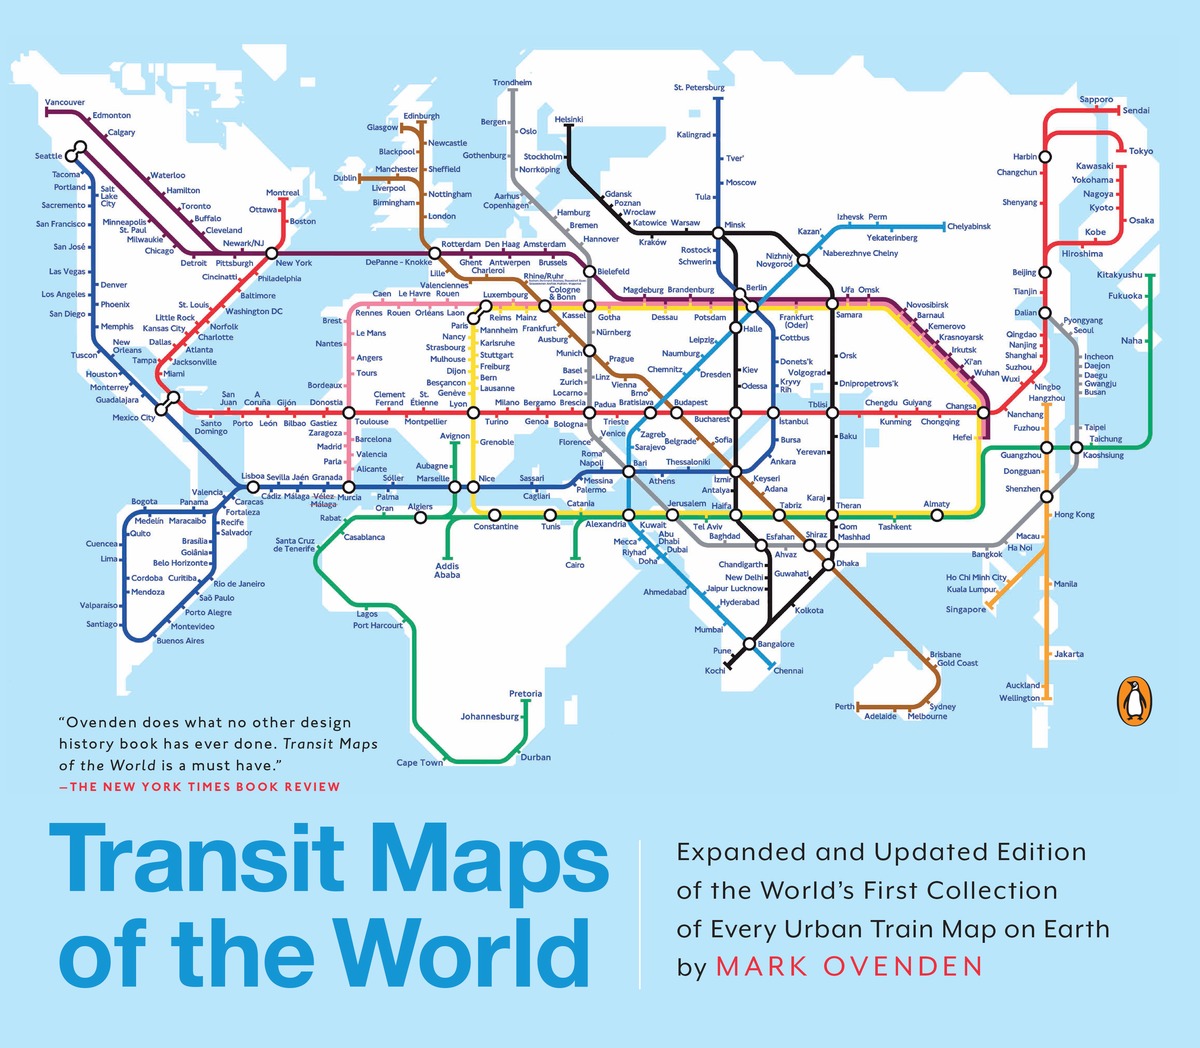 Transit Maps of the World: Expanded And Updated Edition of the World's First Collection of Every Urban Train Map on Earth